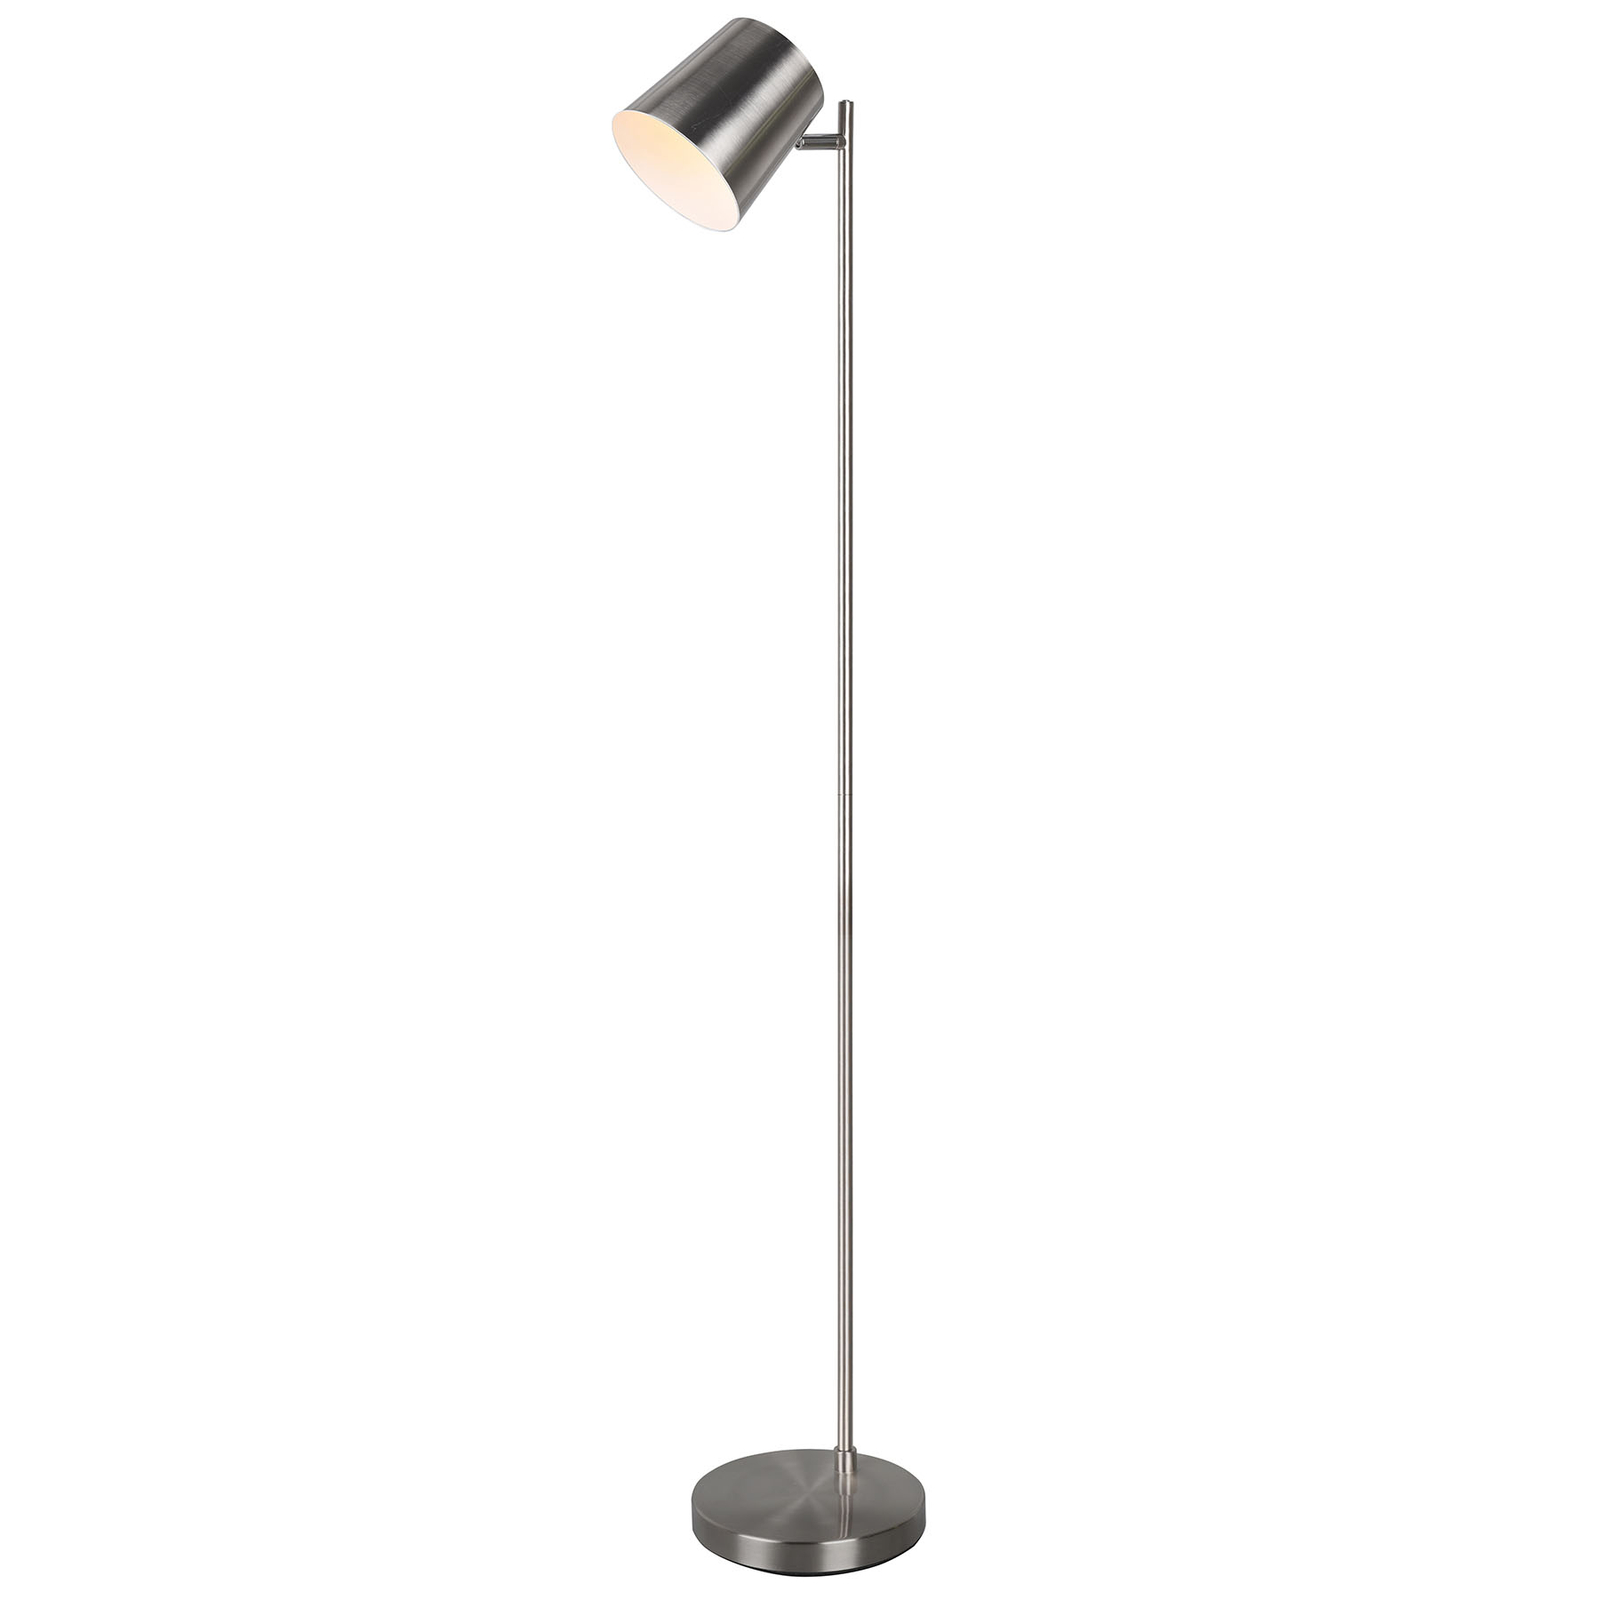 Blake LED floor lamp with battery, dimmable nickel